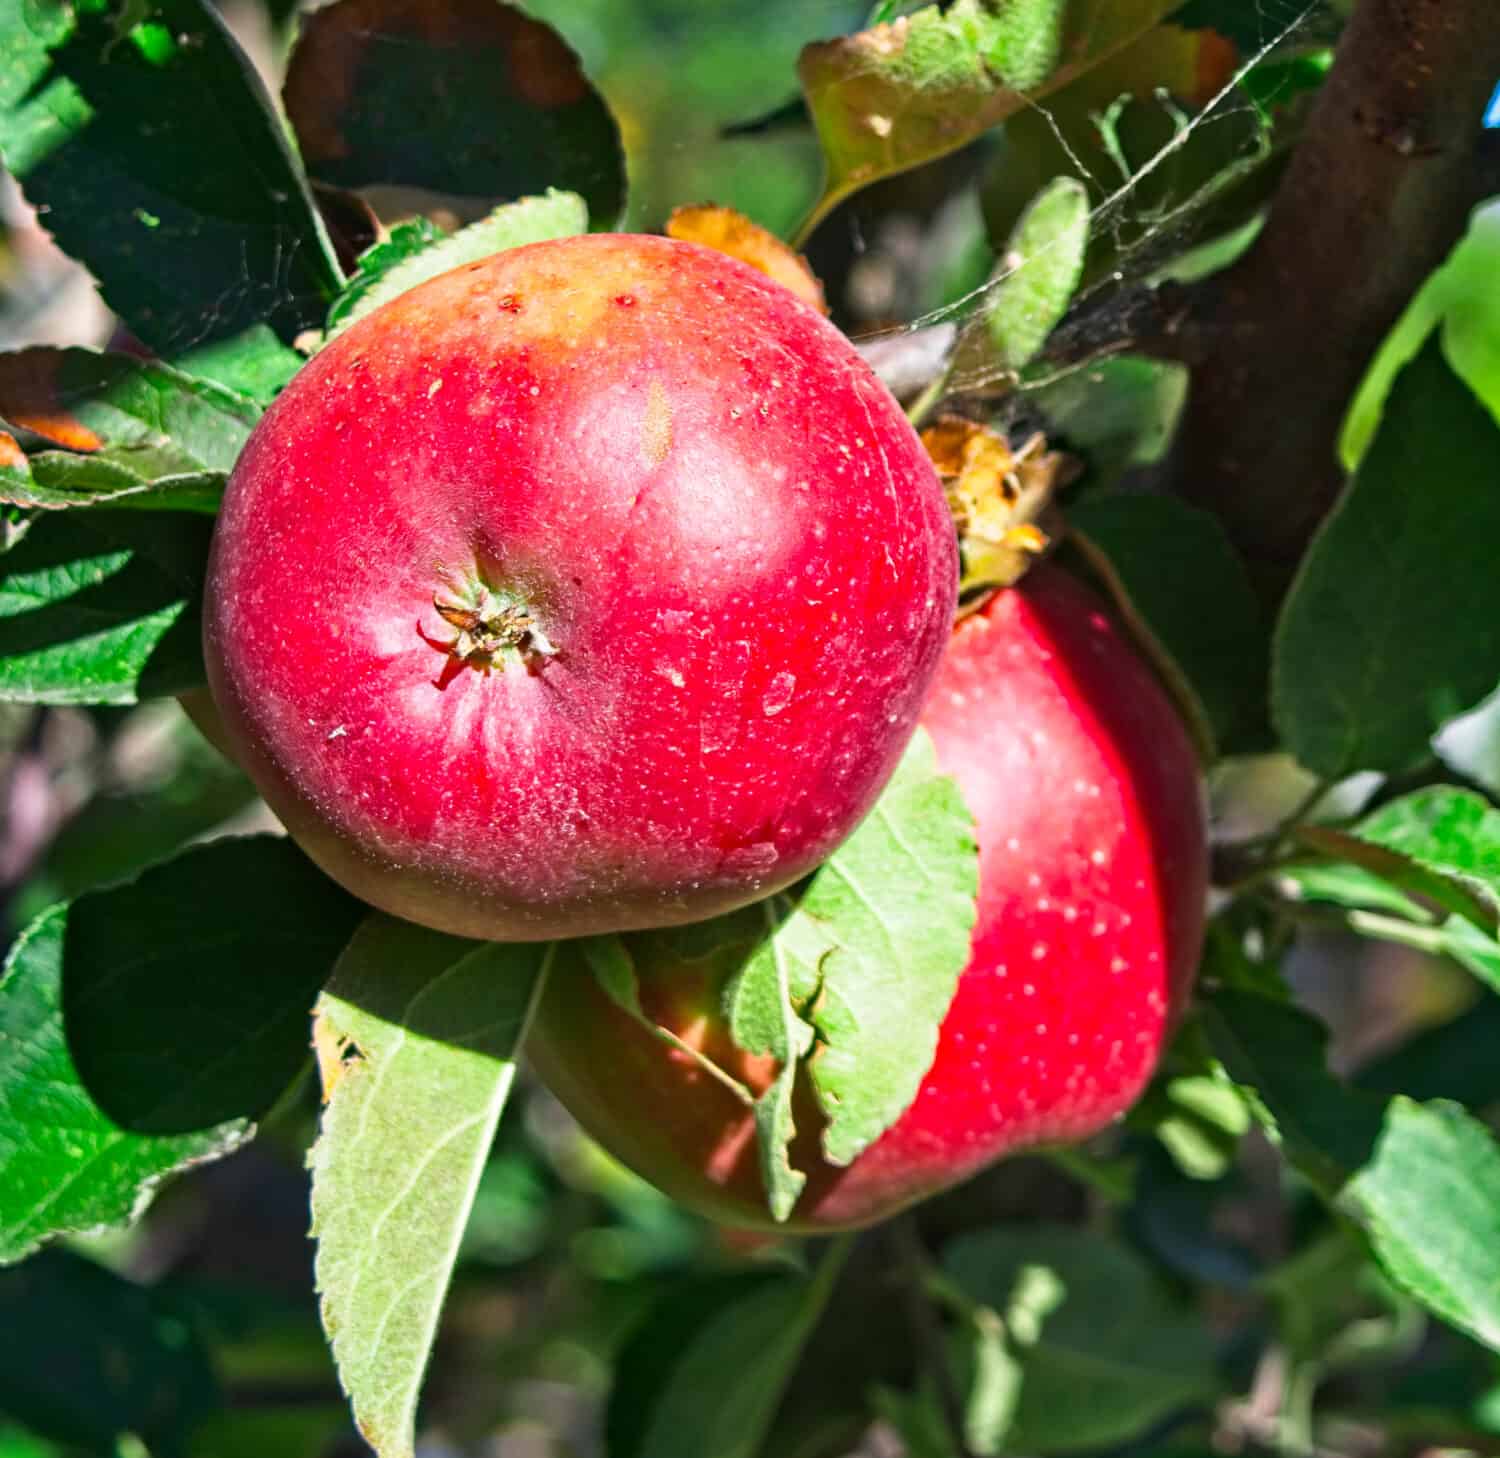 A pair of bright red ripe apples against a background of dark green leaves. These apples are an heirloom variety called northern spy and are growing organically on a homestead in Idaho